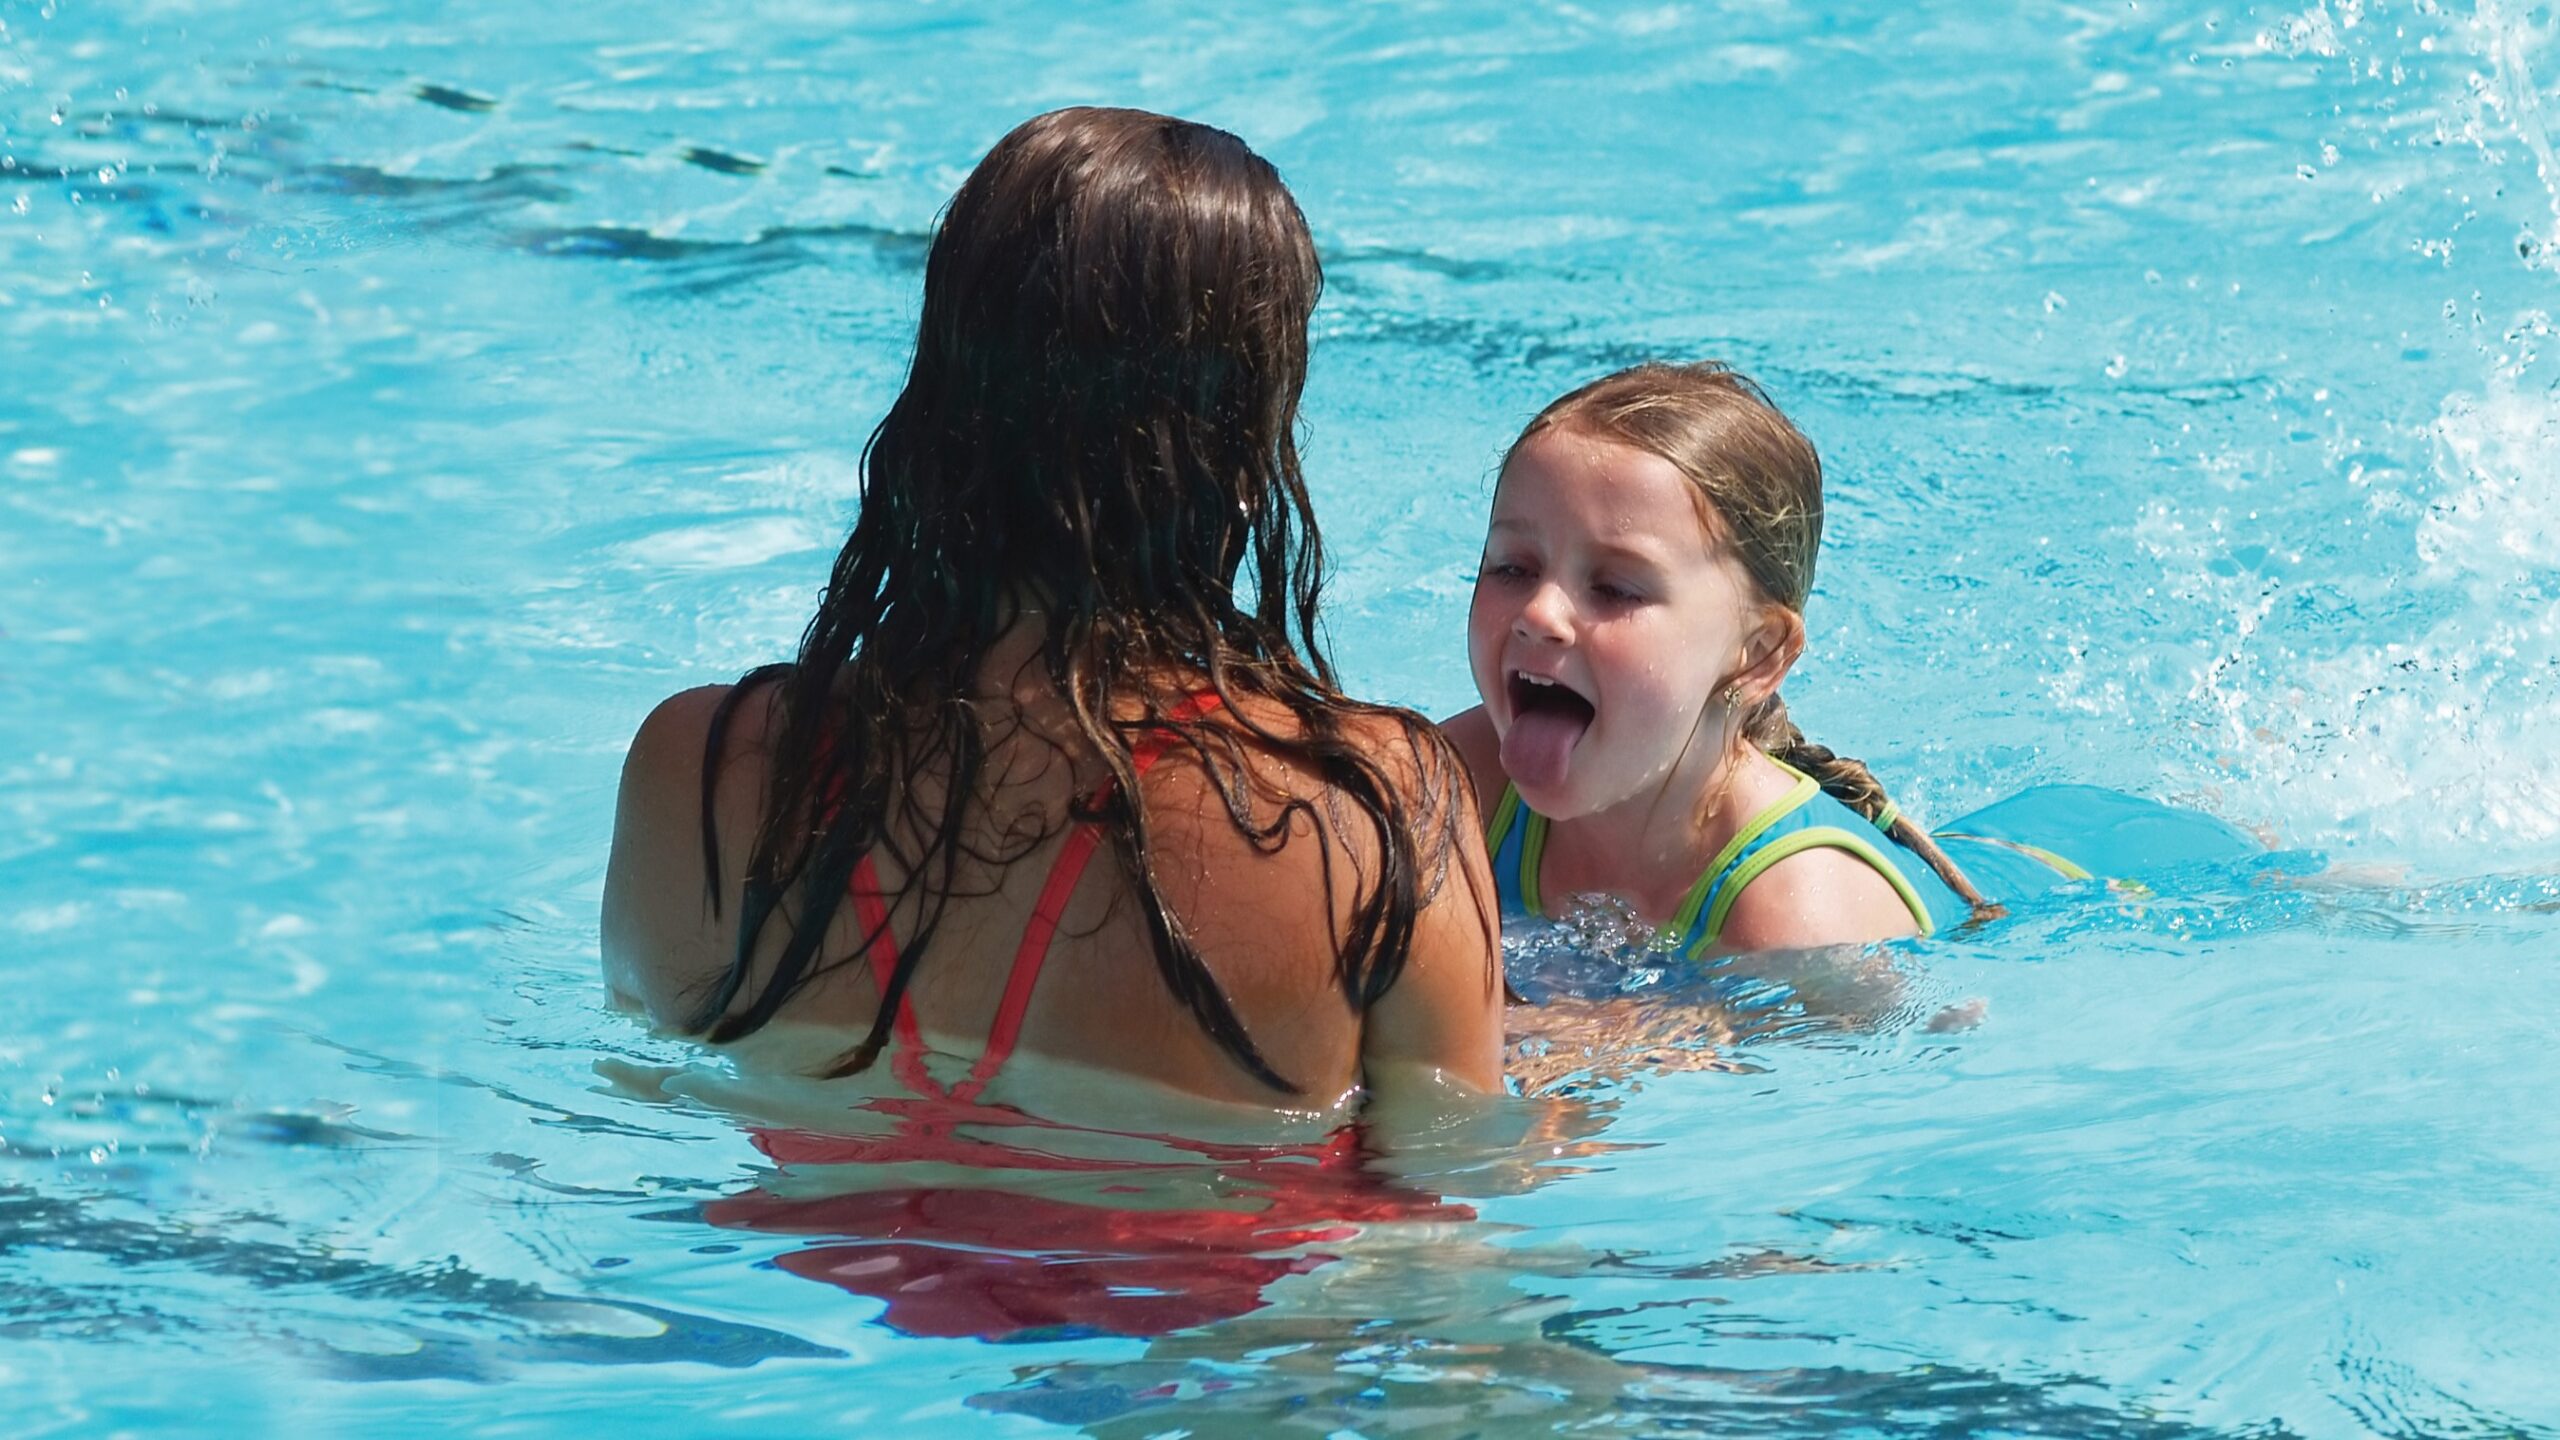 A woman and child in a pool.